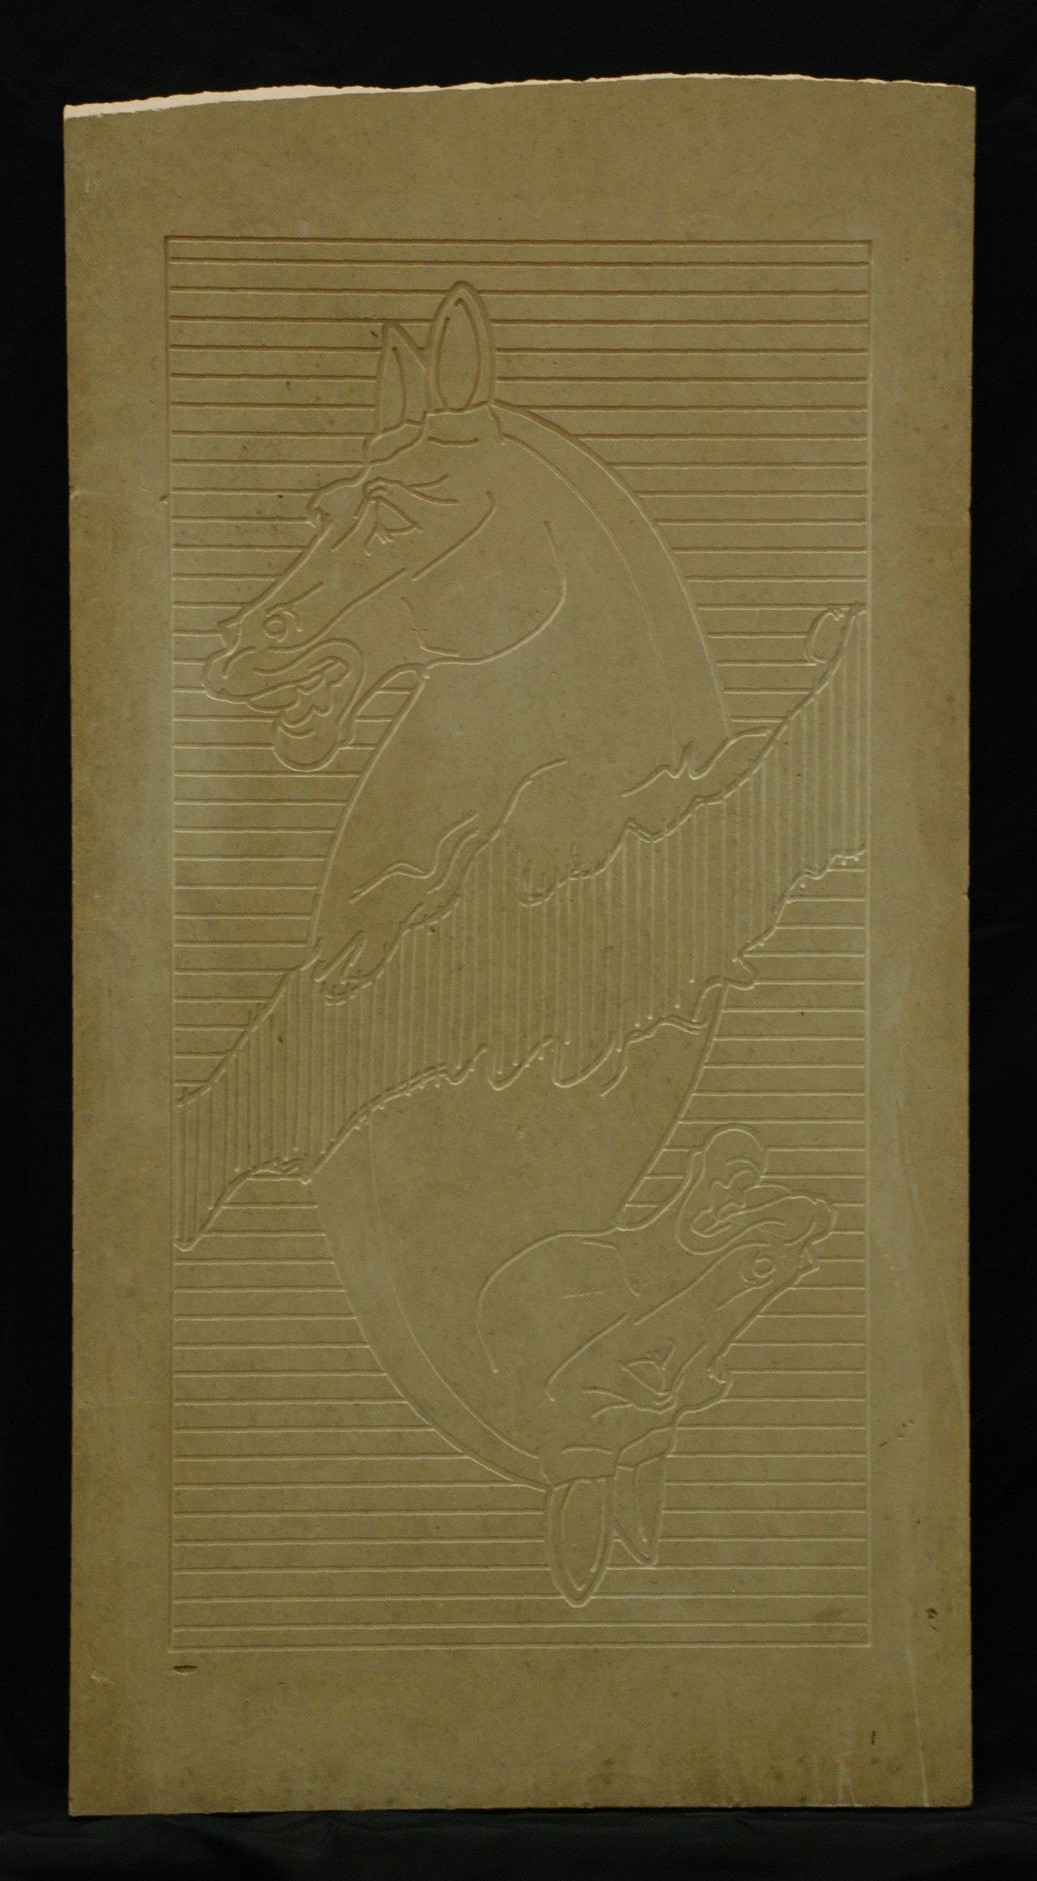 Engraving: From the Han Dynasty